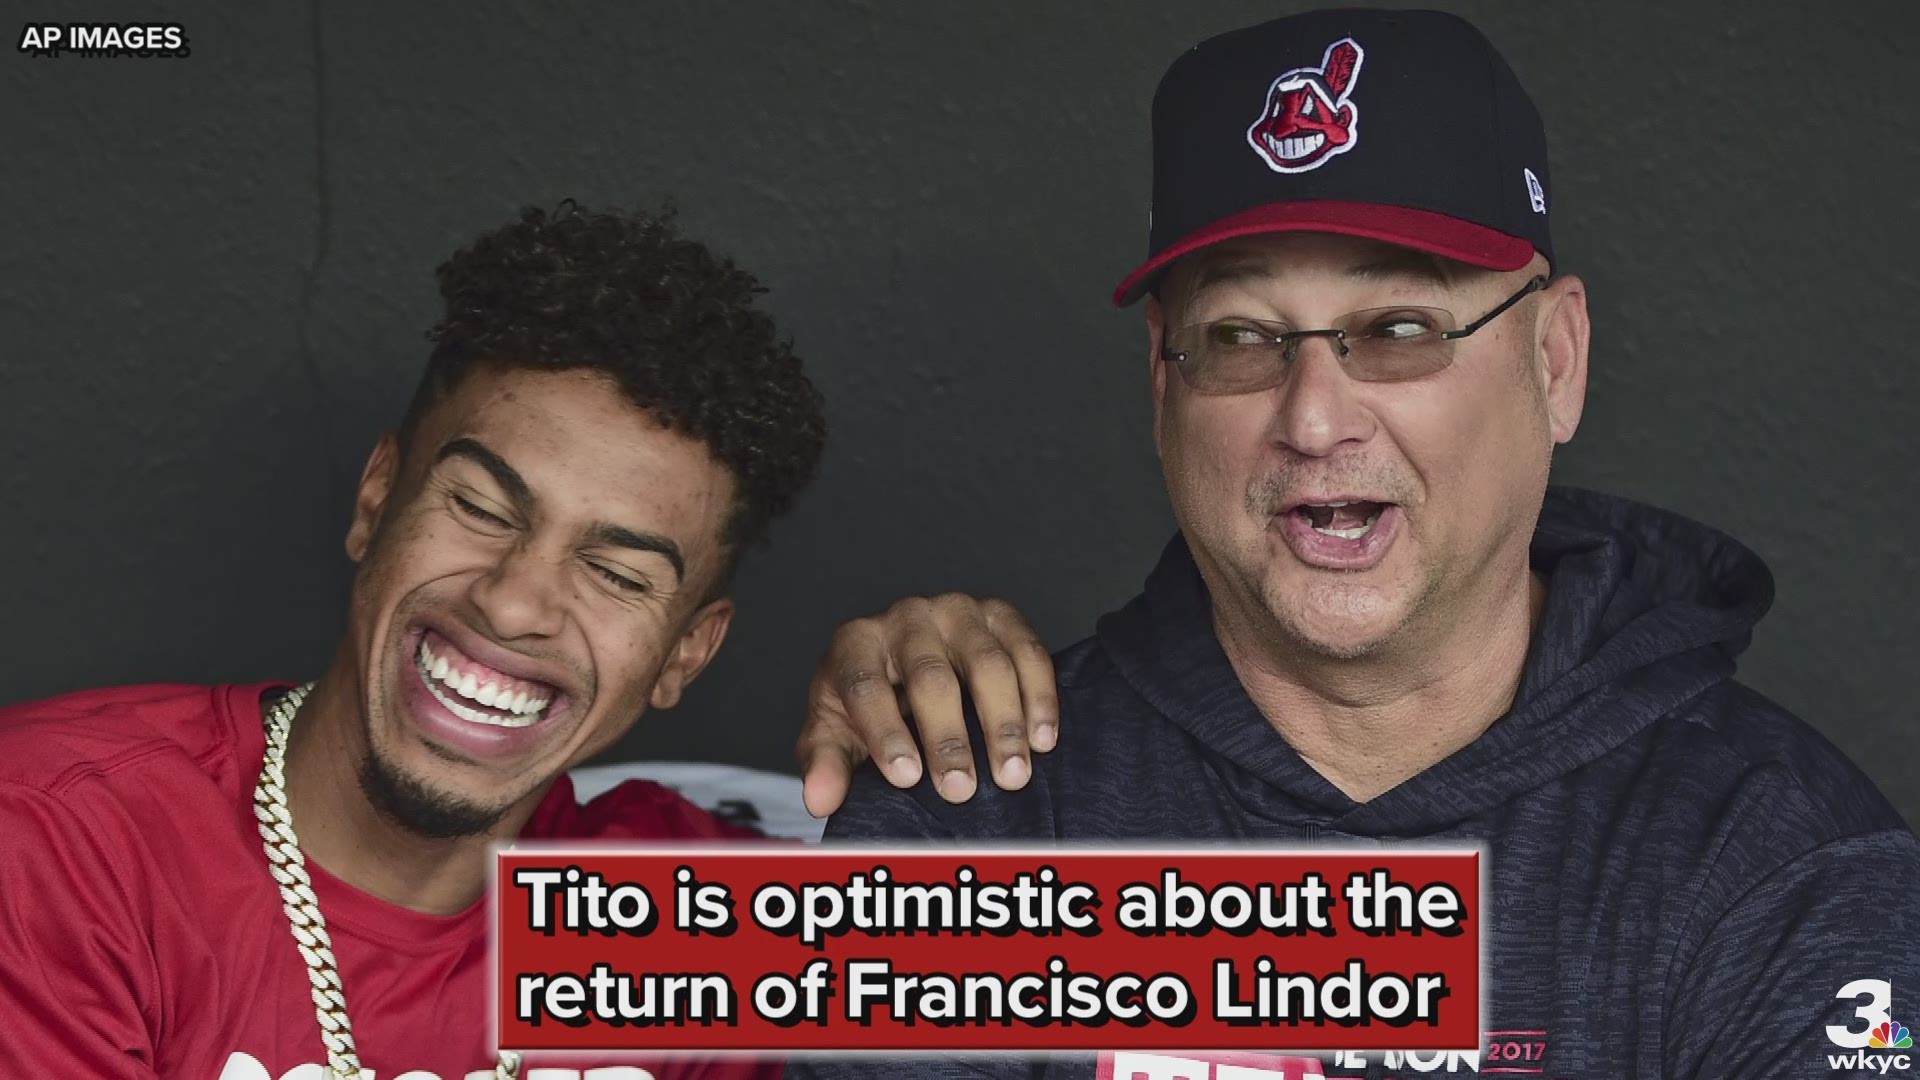 Cleveland Indians manager Terry Francona would not be surprised to see All-Star shortstop Francisco Lindor return quicker than expected from a right calf strain.